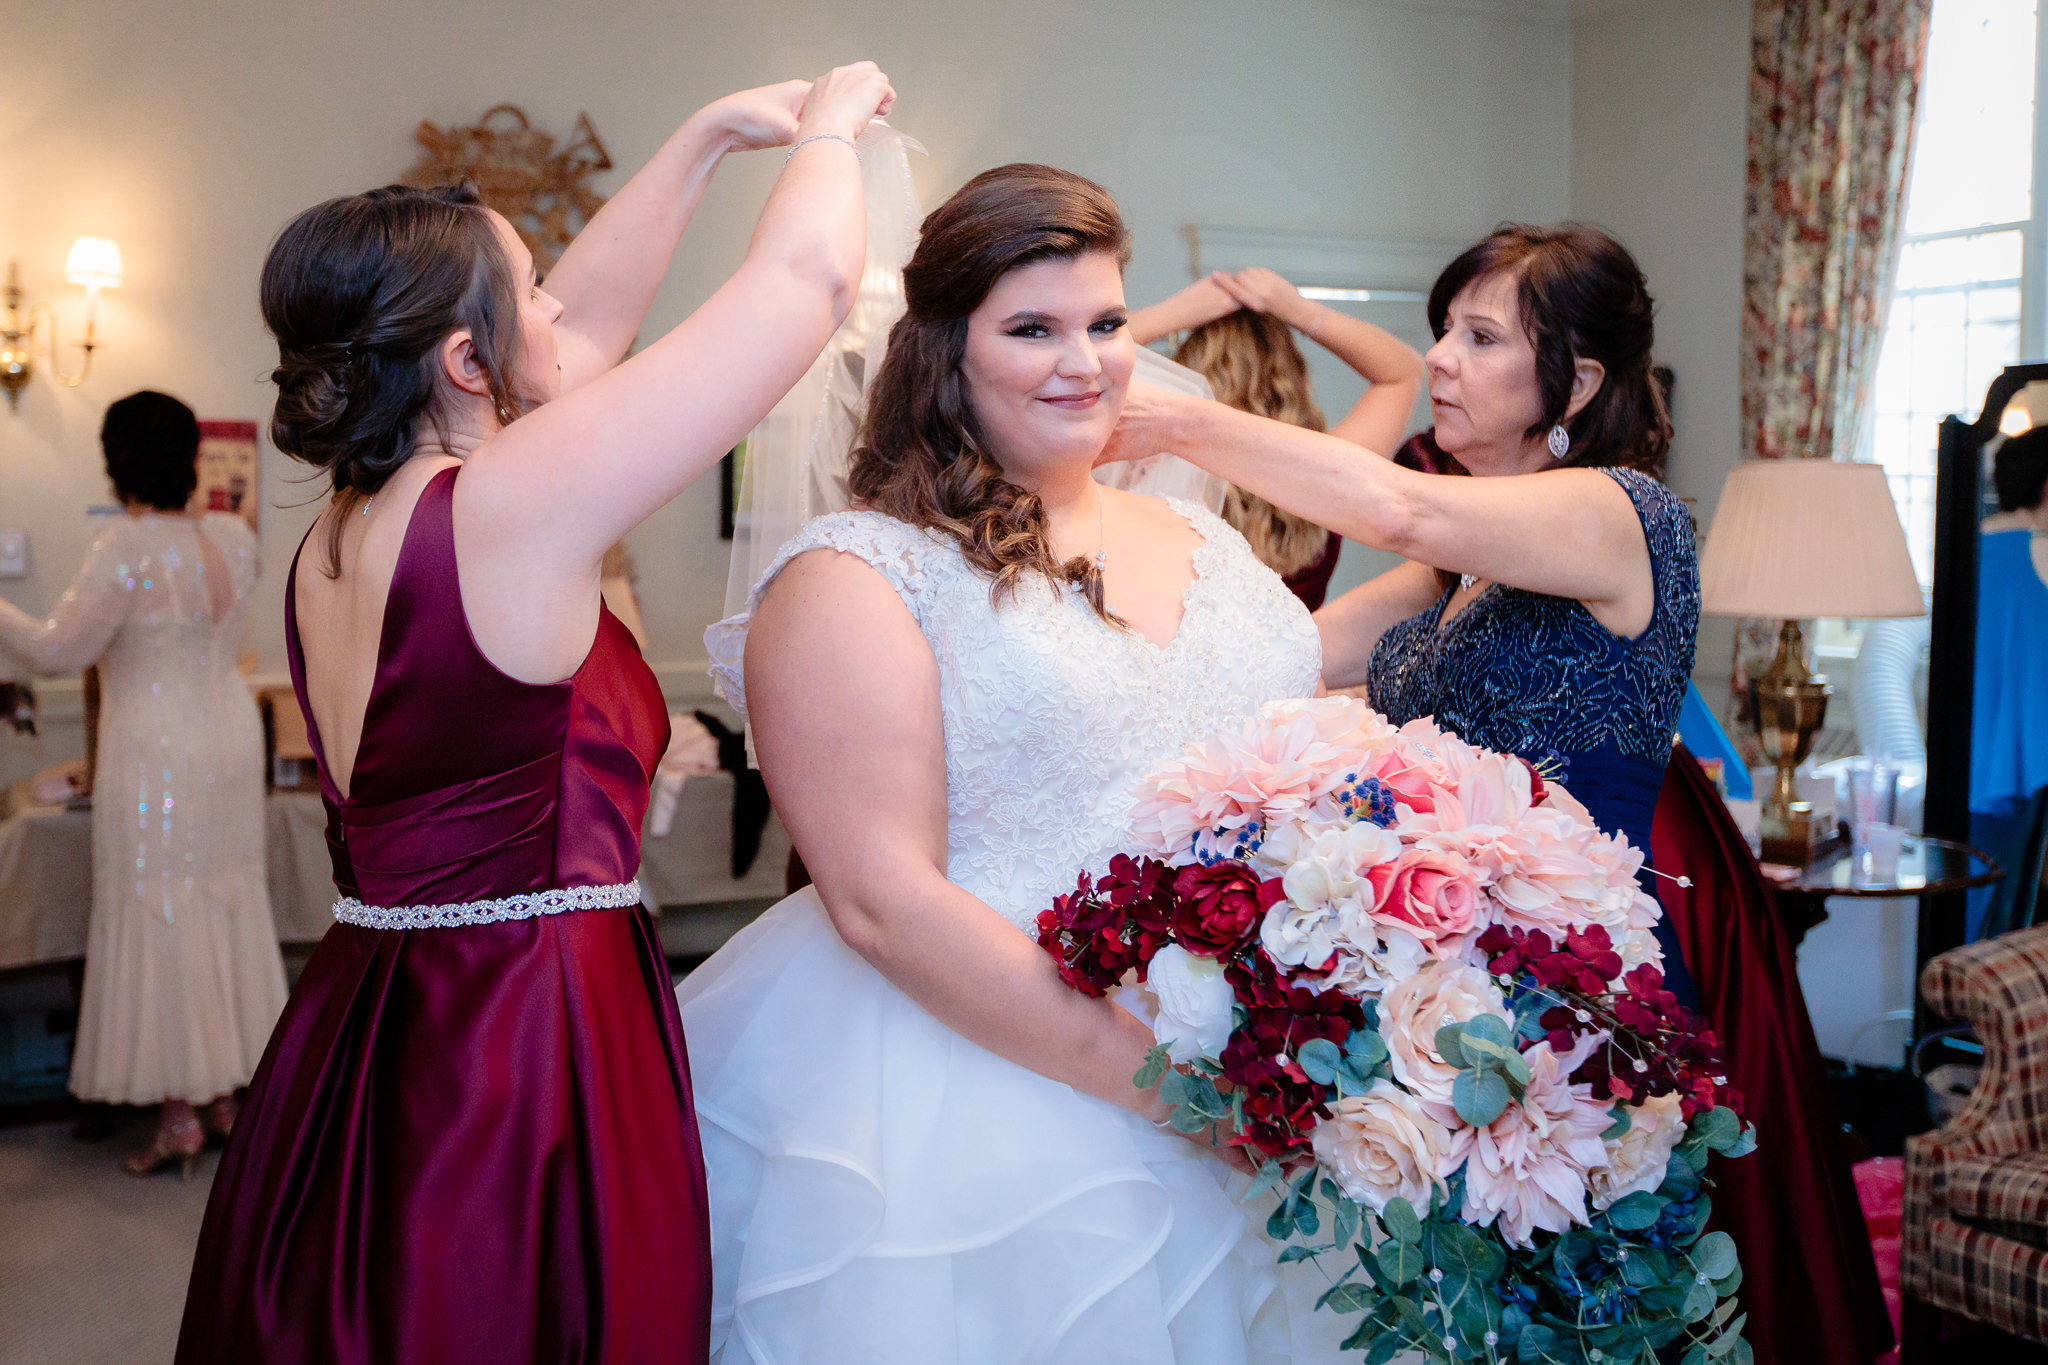 The bride poses with her DIY artificial flowers as a bridesmaid helps adjust her veil at Mt. Lebanon United Methodist Church